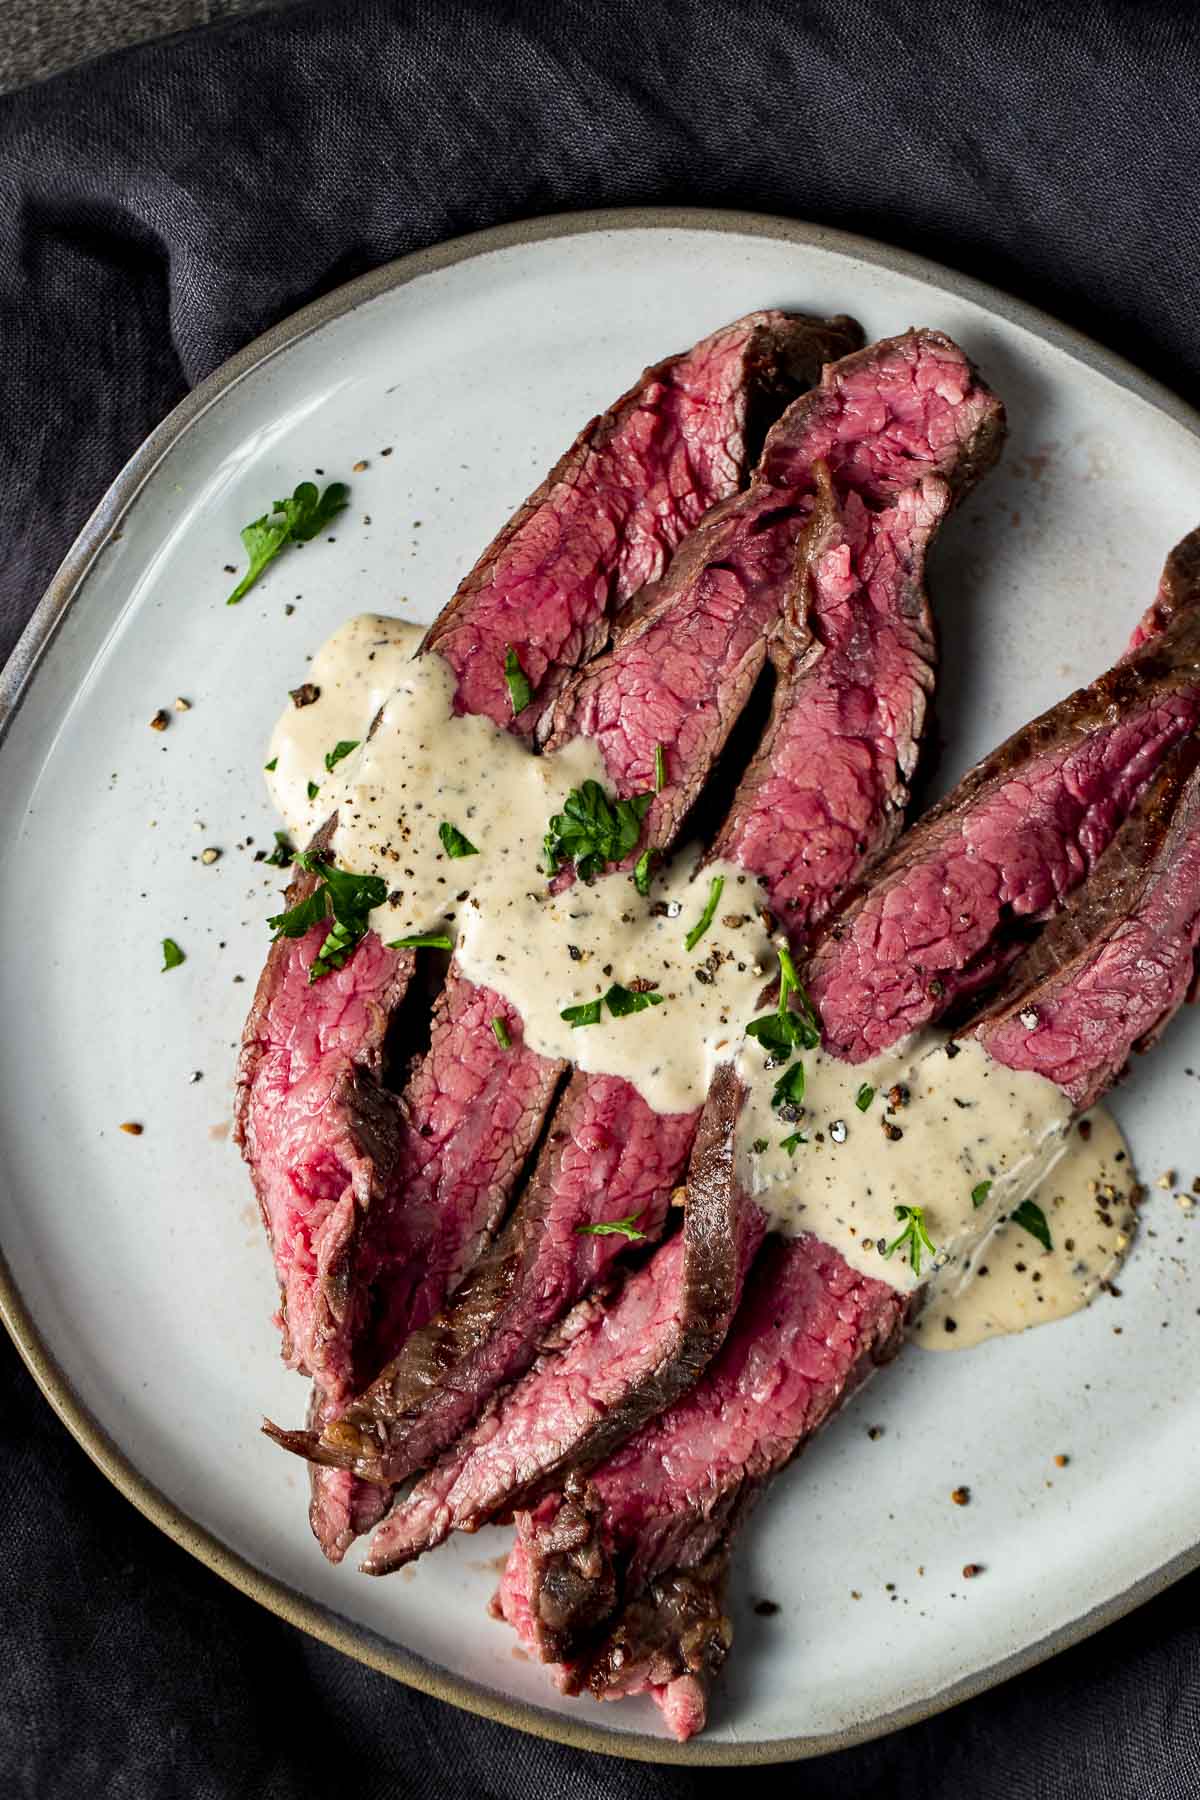 https://www.wenthere8this.com/wp-content/uploads/2021/02/sous-vide-flank-steak-6.jpg